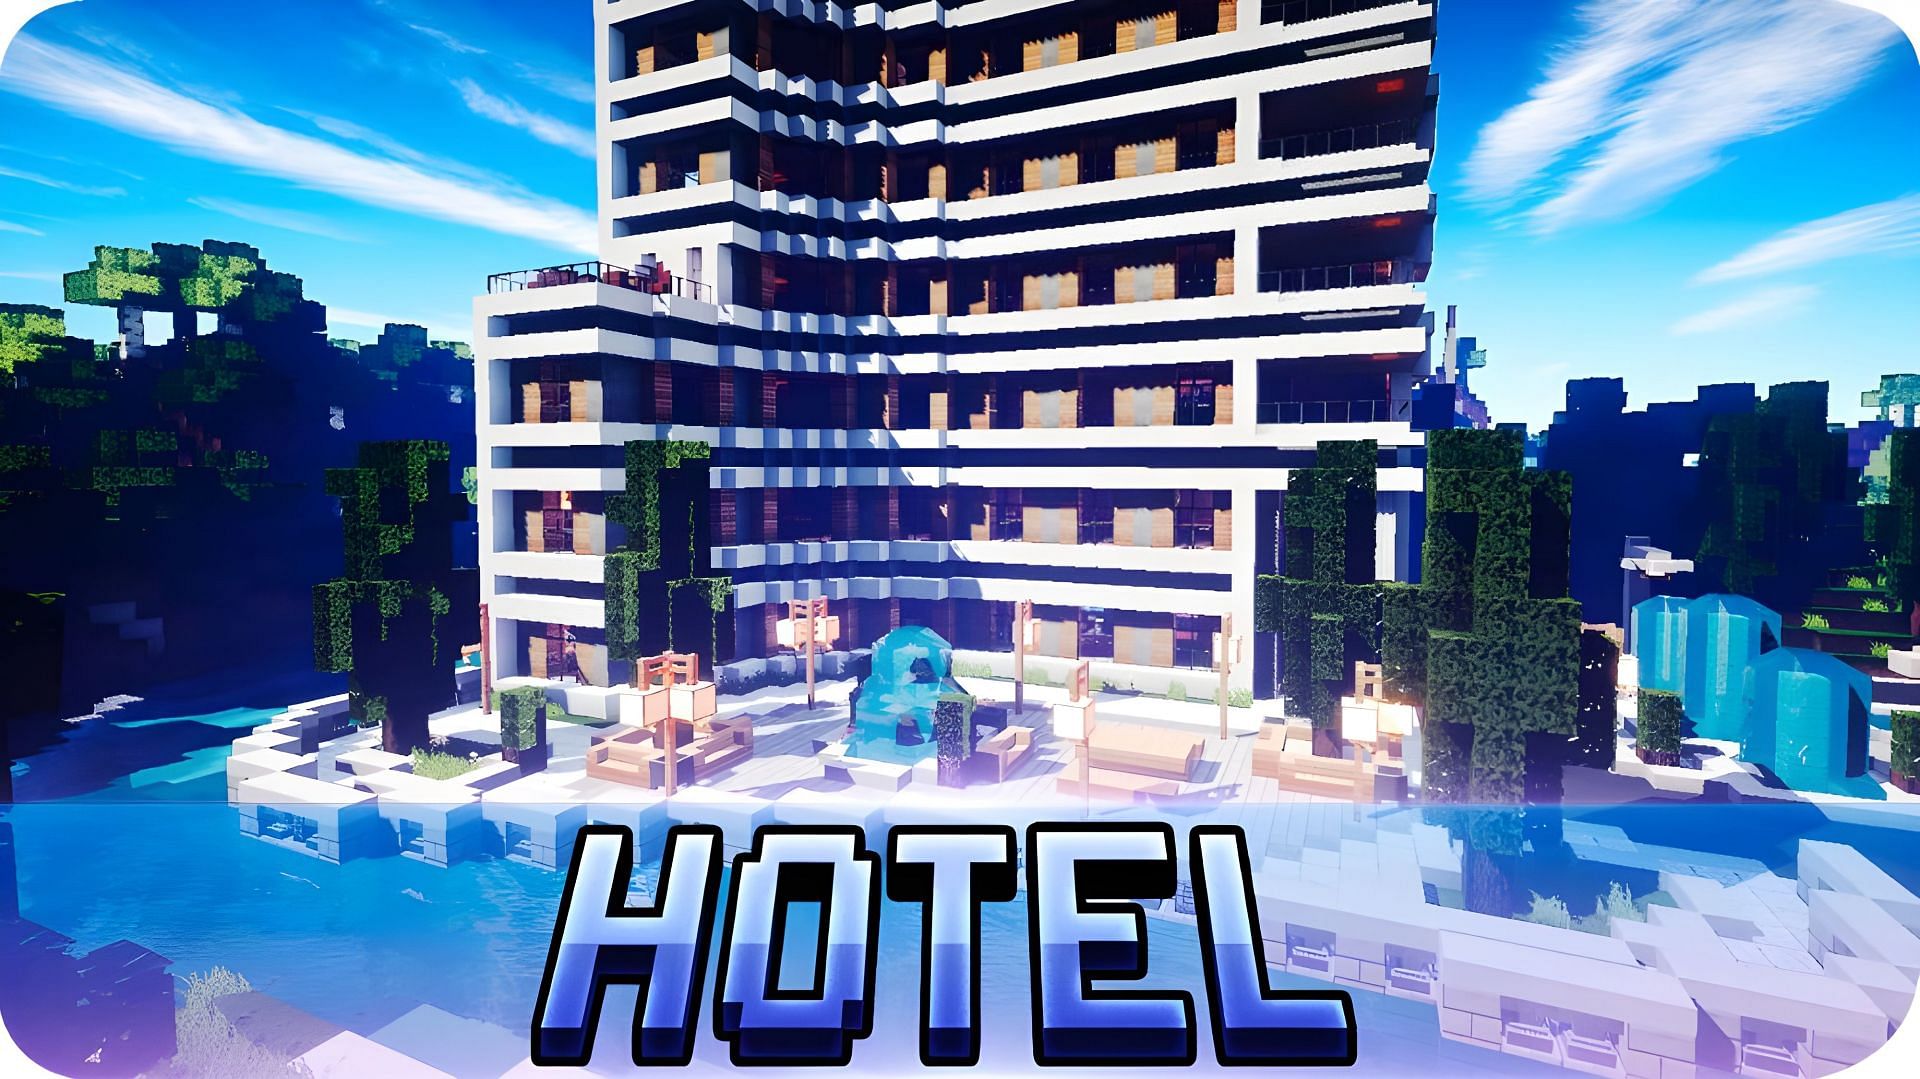 Hotels make for incredible builds in Minecraft (Image via Youtube/JerenVids)